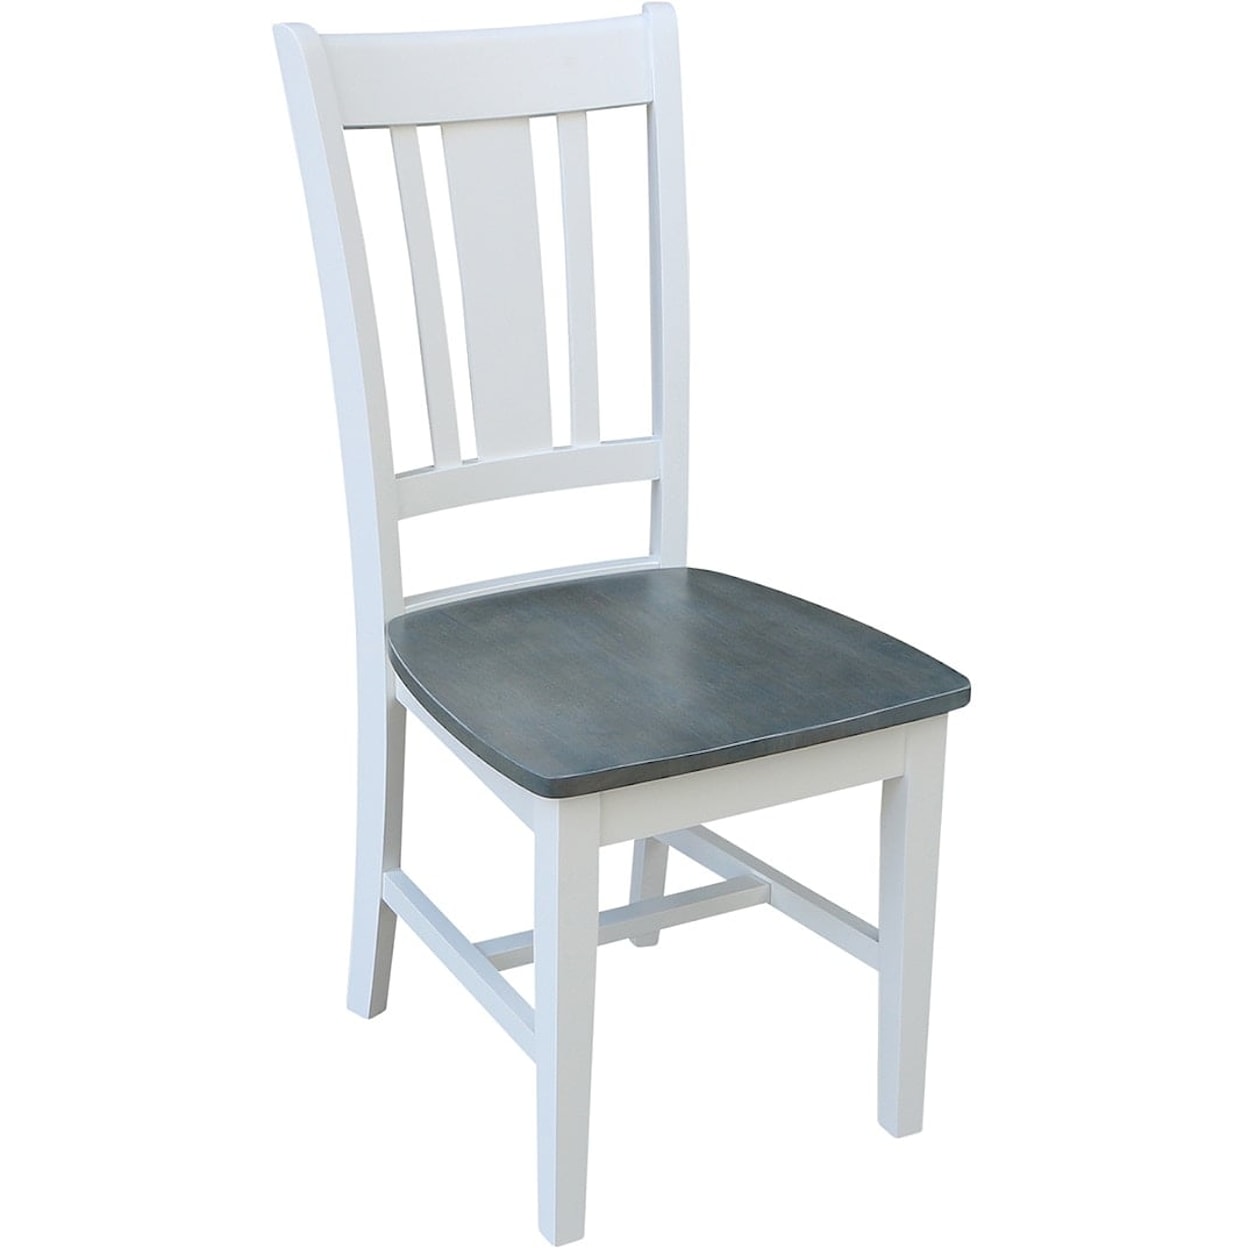 John Thomas Dining Essentials San Remo Dining Chair in Heather Gray/White